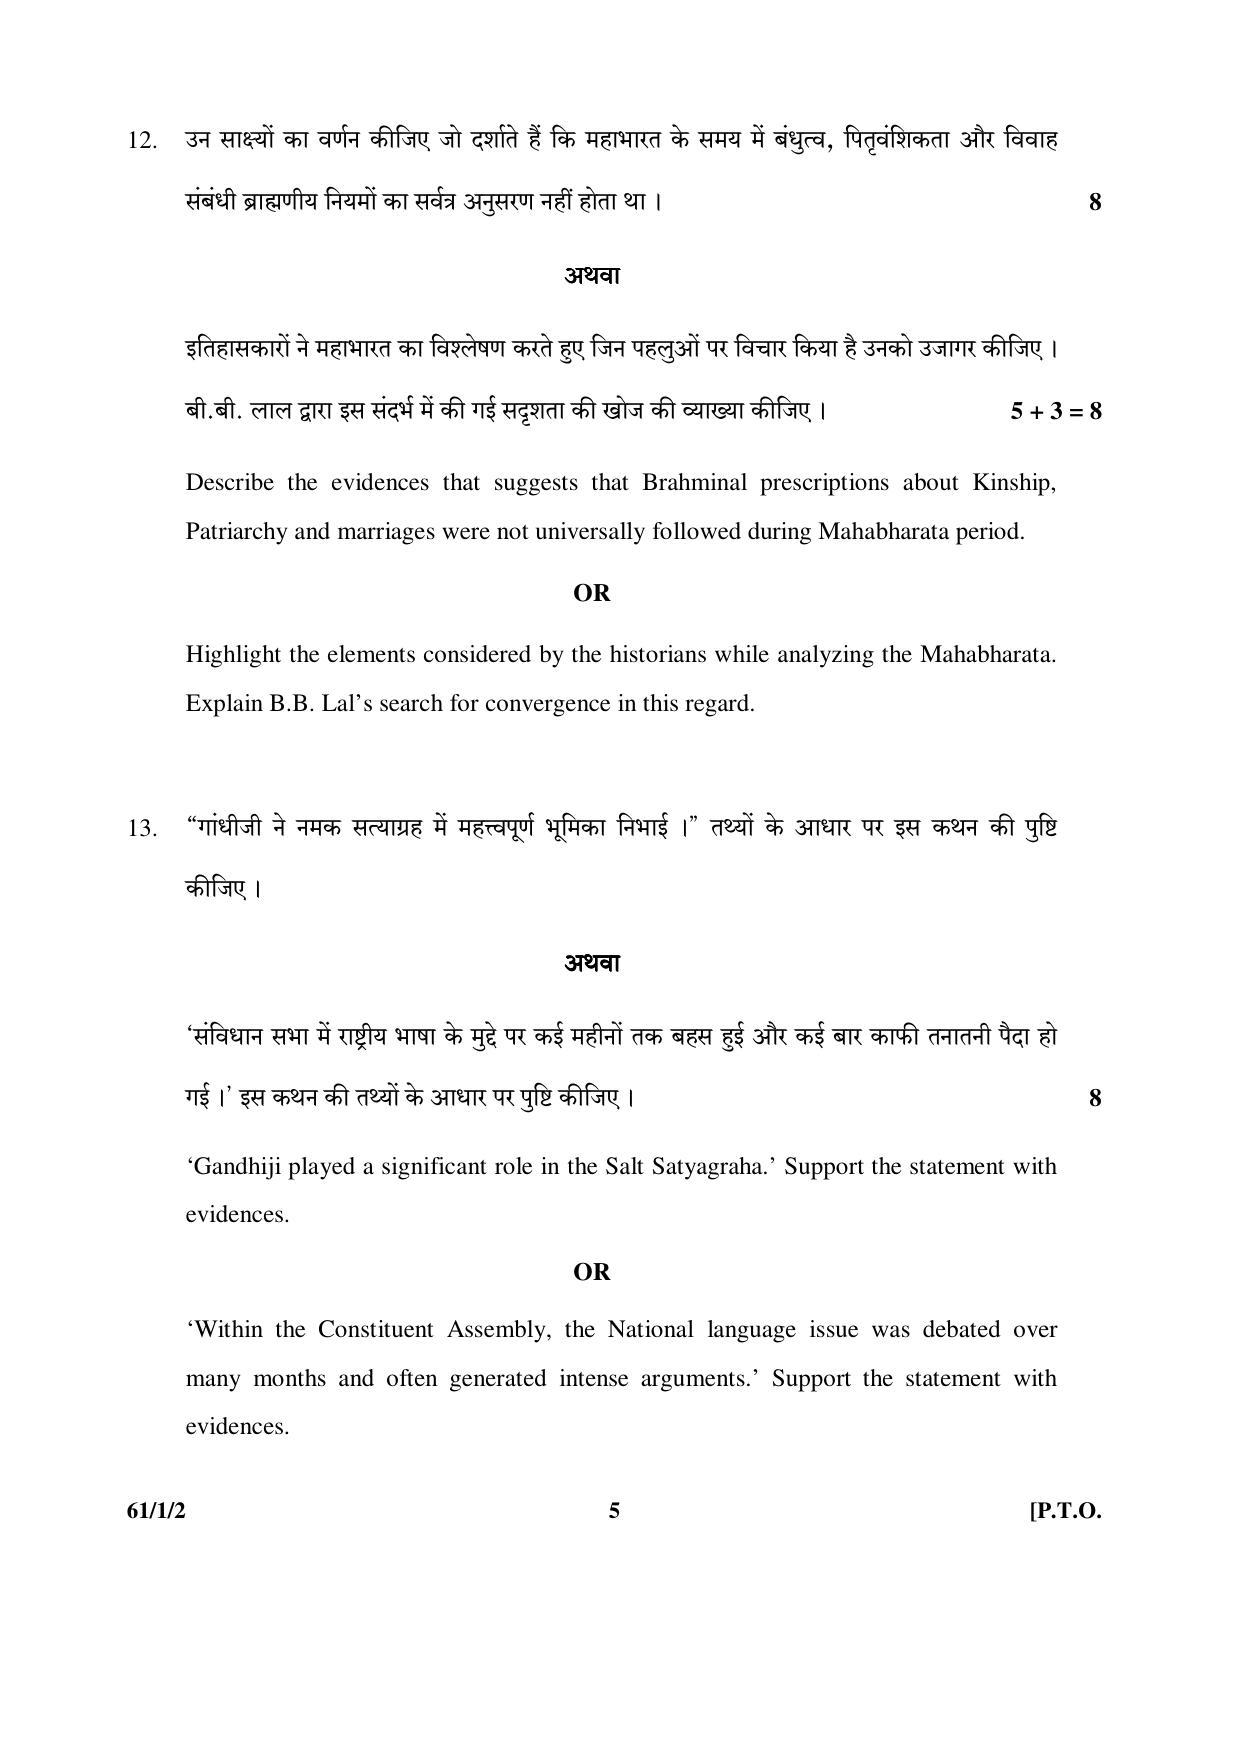 CBSE Class 12 61-1-2  (History) 2017-comptt Question Paper - Page 5